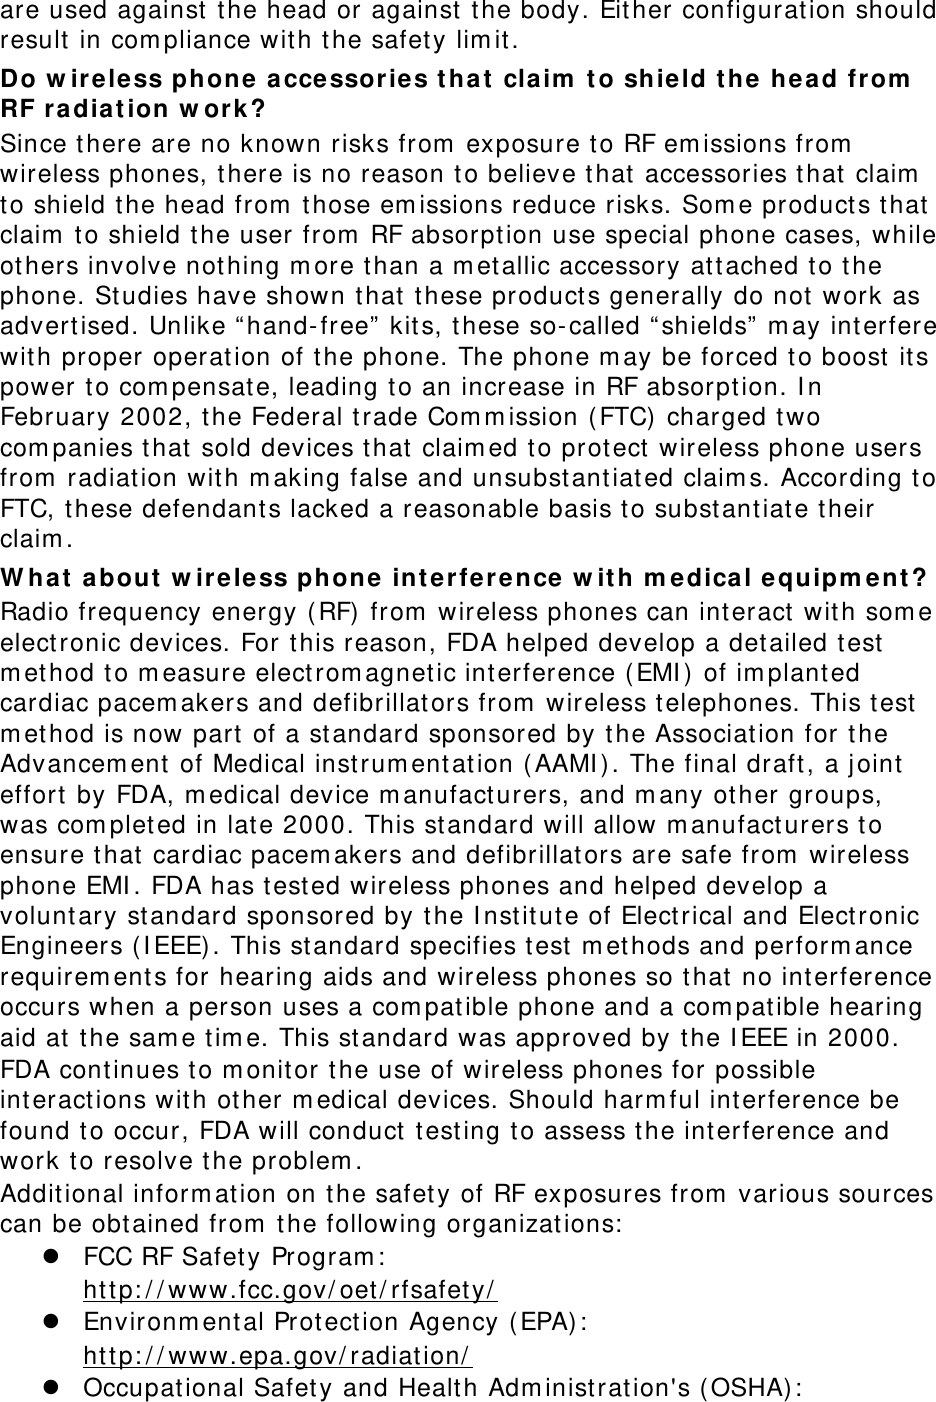 are used against  t he head or against  t he body. Either configuration should result in com pliance wit h the safet y lim it . Do w ir ele ss phone  accessories t hat claim  t o shield t he hea d from  RF radia t ion w ork? Since there are no known risks from  exposure t o RF em issions from  wireless phones, t here is no reason t o believe that accessories that claim  to shield t he head from  those em issions reduce risks. Som e product s t hat claim  t o shield the user from  RF absorpt ion use special phone cases, while others involve not hing m ore than a m etallic accessory at t ached to the phone. Studies have shown t hat these product s generally do not  work as advert ised. Unlike “ hand- free”  kits, t hese so-called “ shields”  m ay int erfere with proper operation of t he phone. The phone m ay be forced to boost  it s power to com pensat e, leading t o an increase in RF absorption. I n February 2002, the Federal t rade Com m ission ( FTC) charged two com panies t hat sold devices t hat  claim ed to protect  wireless phone users from  radiat ion wit h m aking false and unsubst antiated claim s. According to FTC, these defendant s lacked a reasonable basis t o substantiate t heir claim . W hat about  w ireless phone  int erference  w it h m edica l equipm ent? Radio frequency energy ( RF)  from  wireless phones can int eract with som e elect ronic devices. For this reason, FDA helped develop a det ailed t est  m ethod t o m easure elect rom agnetic int erference ( EMI )  of im plant ed cardiac pacem akers and defibrillators from  wireless t elephones. This t est m ethod is now part  of a standard sponsored by t he Association for t he Advancem ent of Medical instrum ent ation ( AAMI ) . The final draft , a j oint effort  by FDA, m edical device m anufact urers, and m any other groups, was com pleted in lat e 2000. This st andard will allow m anufact urers t o ensure that cardiac pacem akers and defibrillators are safe from  wireless phone EMI . FDA has tested wireless phones and helped develop a volunt ary st andard sponsored by the I nstit ute of Electrical and Elect ronic Engineers ( I EEE) . This standard specifies t est  m et hods and perform ance requirem ents for hearing aids and wireless phones so t hat no int erference occurs when a person uses a com patible phone and a com patible hearing aid at  t he sam e tim e. This standard was approved by t he I EEE in 2000. FDA cont inues to m onit or the use of wireless phones for possible interact ions wit h other m edical devices. Should harm ful int erference be found t o occur, FDA will conduct  t est ing t o assess t he int erference and work t o resolve t he problem . Additional inform at ion on the safet y of RF exposures from  various sources can be obtained from  t he following organizations:  z FCC RF Safet y Program :   http: / / www.fcc.gov/ oet/ rfsafet y/  z Environm ent al Prot ect ion Agency ( EPA) :   http: / / www.epa.gov/ radiat ion/  z Occupational Safet y and Health Adm inist ration&apos;s ( OSHA) :    